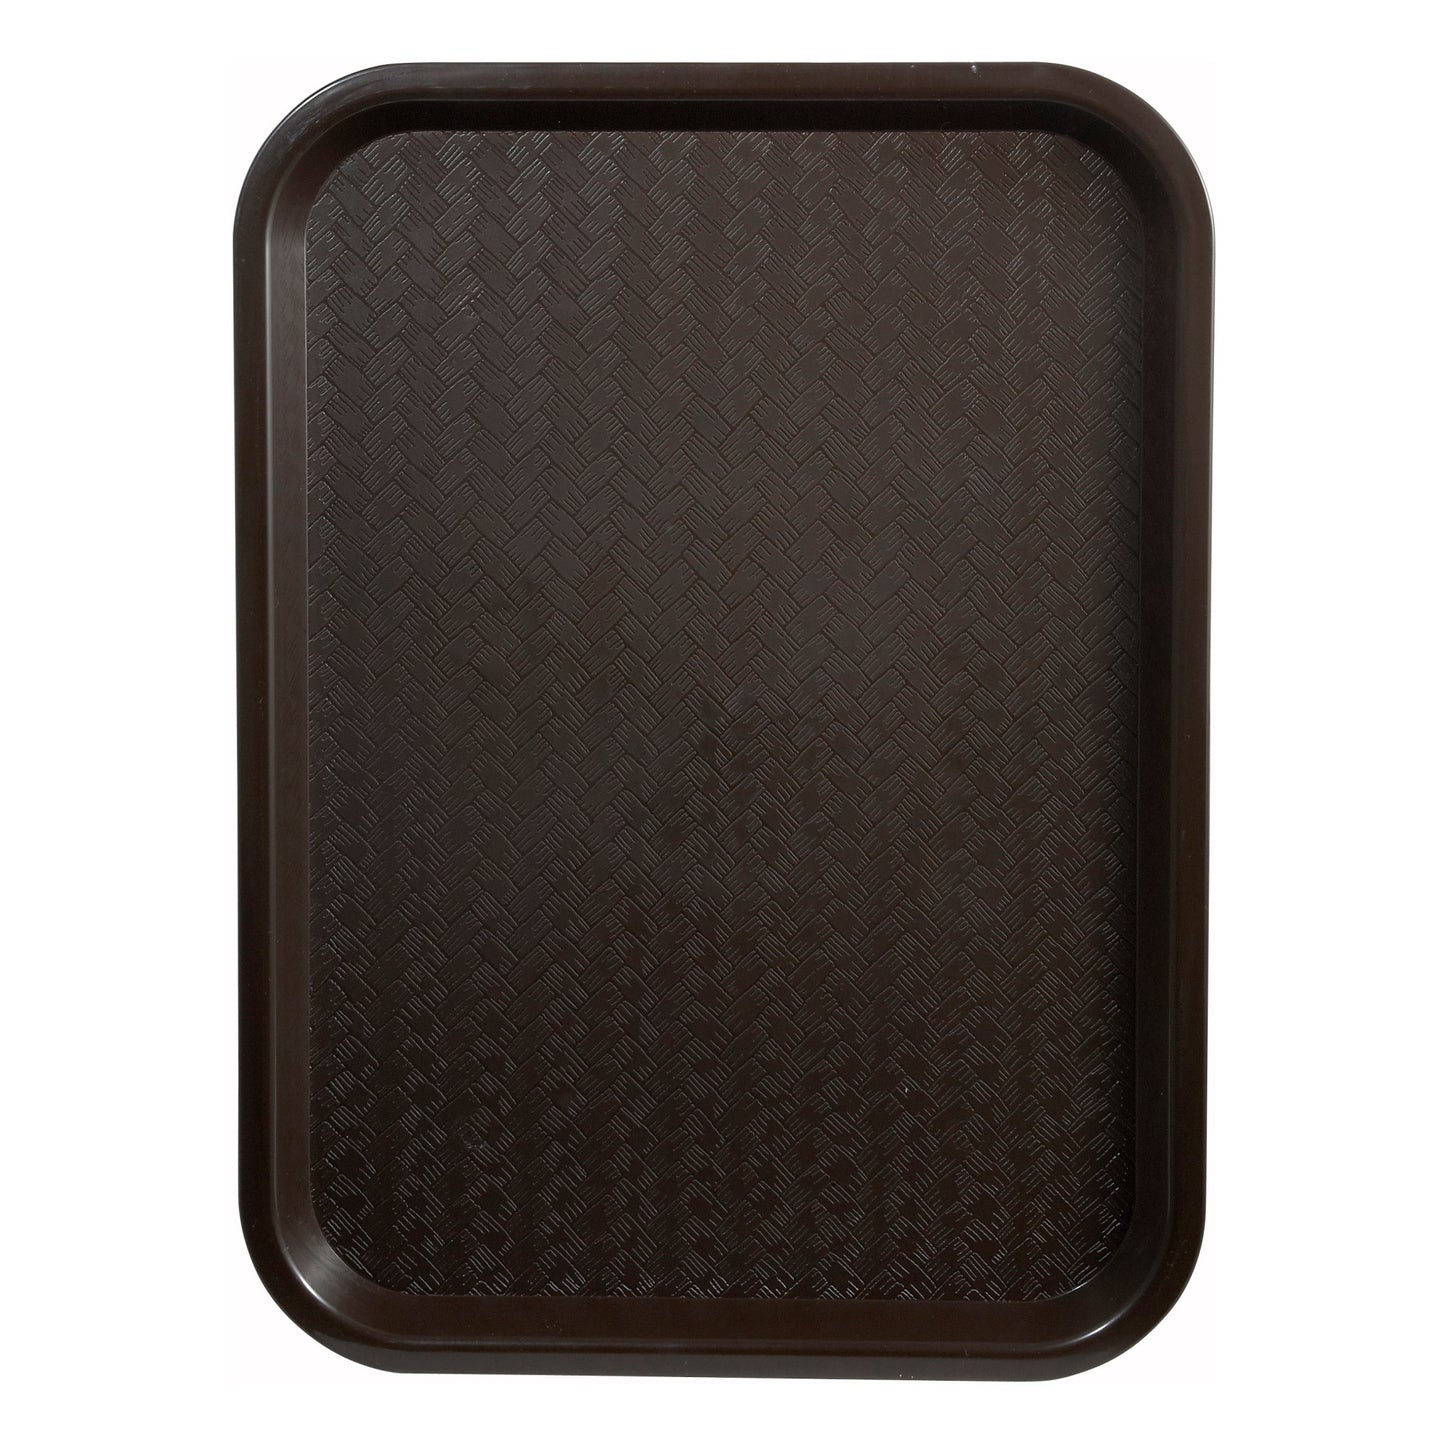 FFT-1216B - High Quality Plastic Cafeteria Tray - 12 x 16, Brown